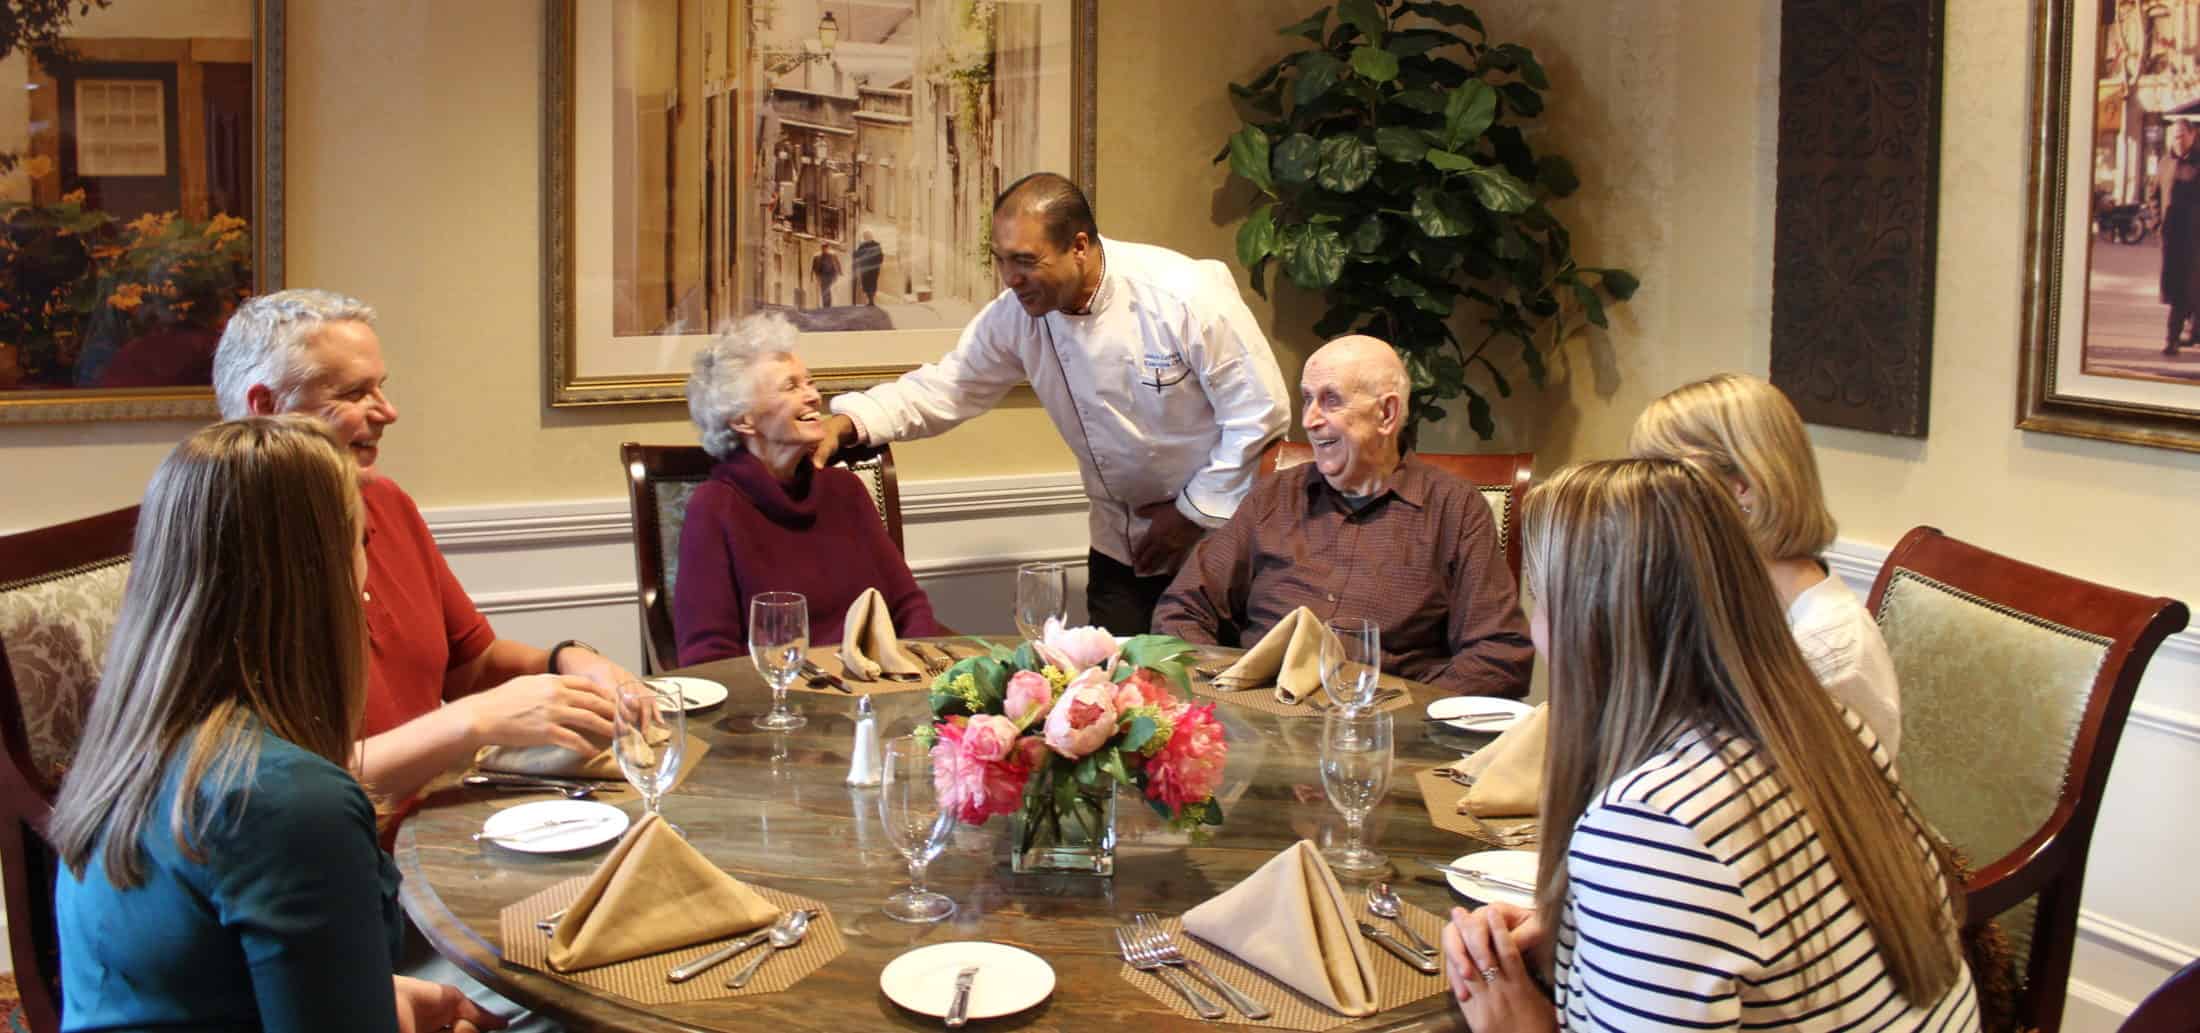 Chef Samir with Kensington Falls Church Family in dining room